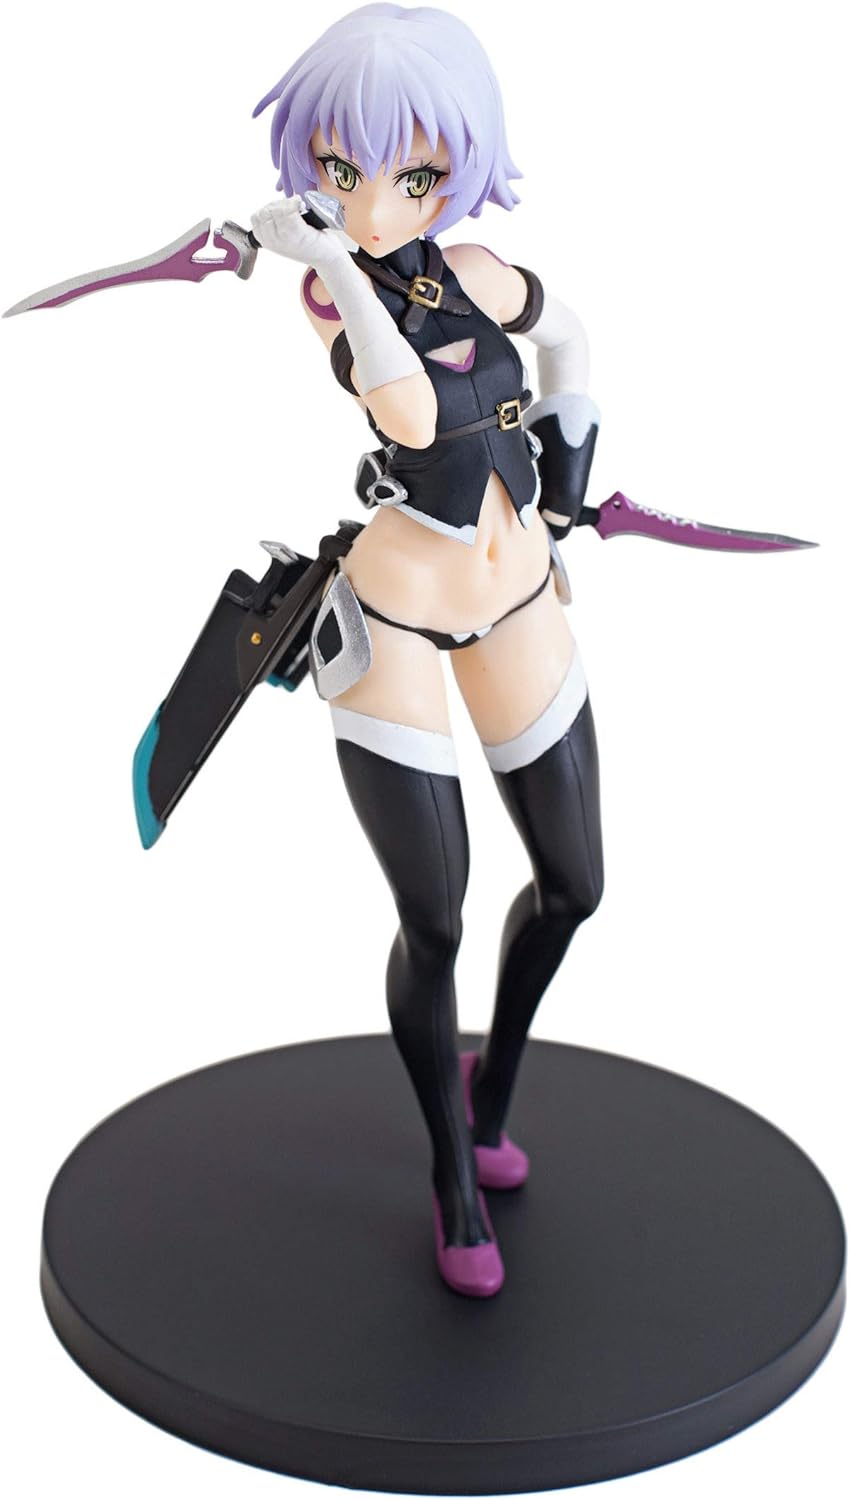 Taito Fateapocrypha Assassin Of Black 7 Action Figure Review Anime Sparkle